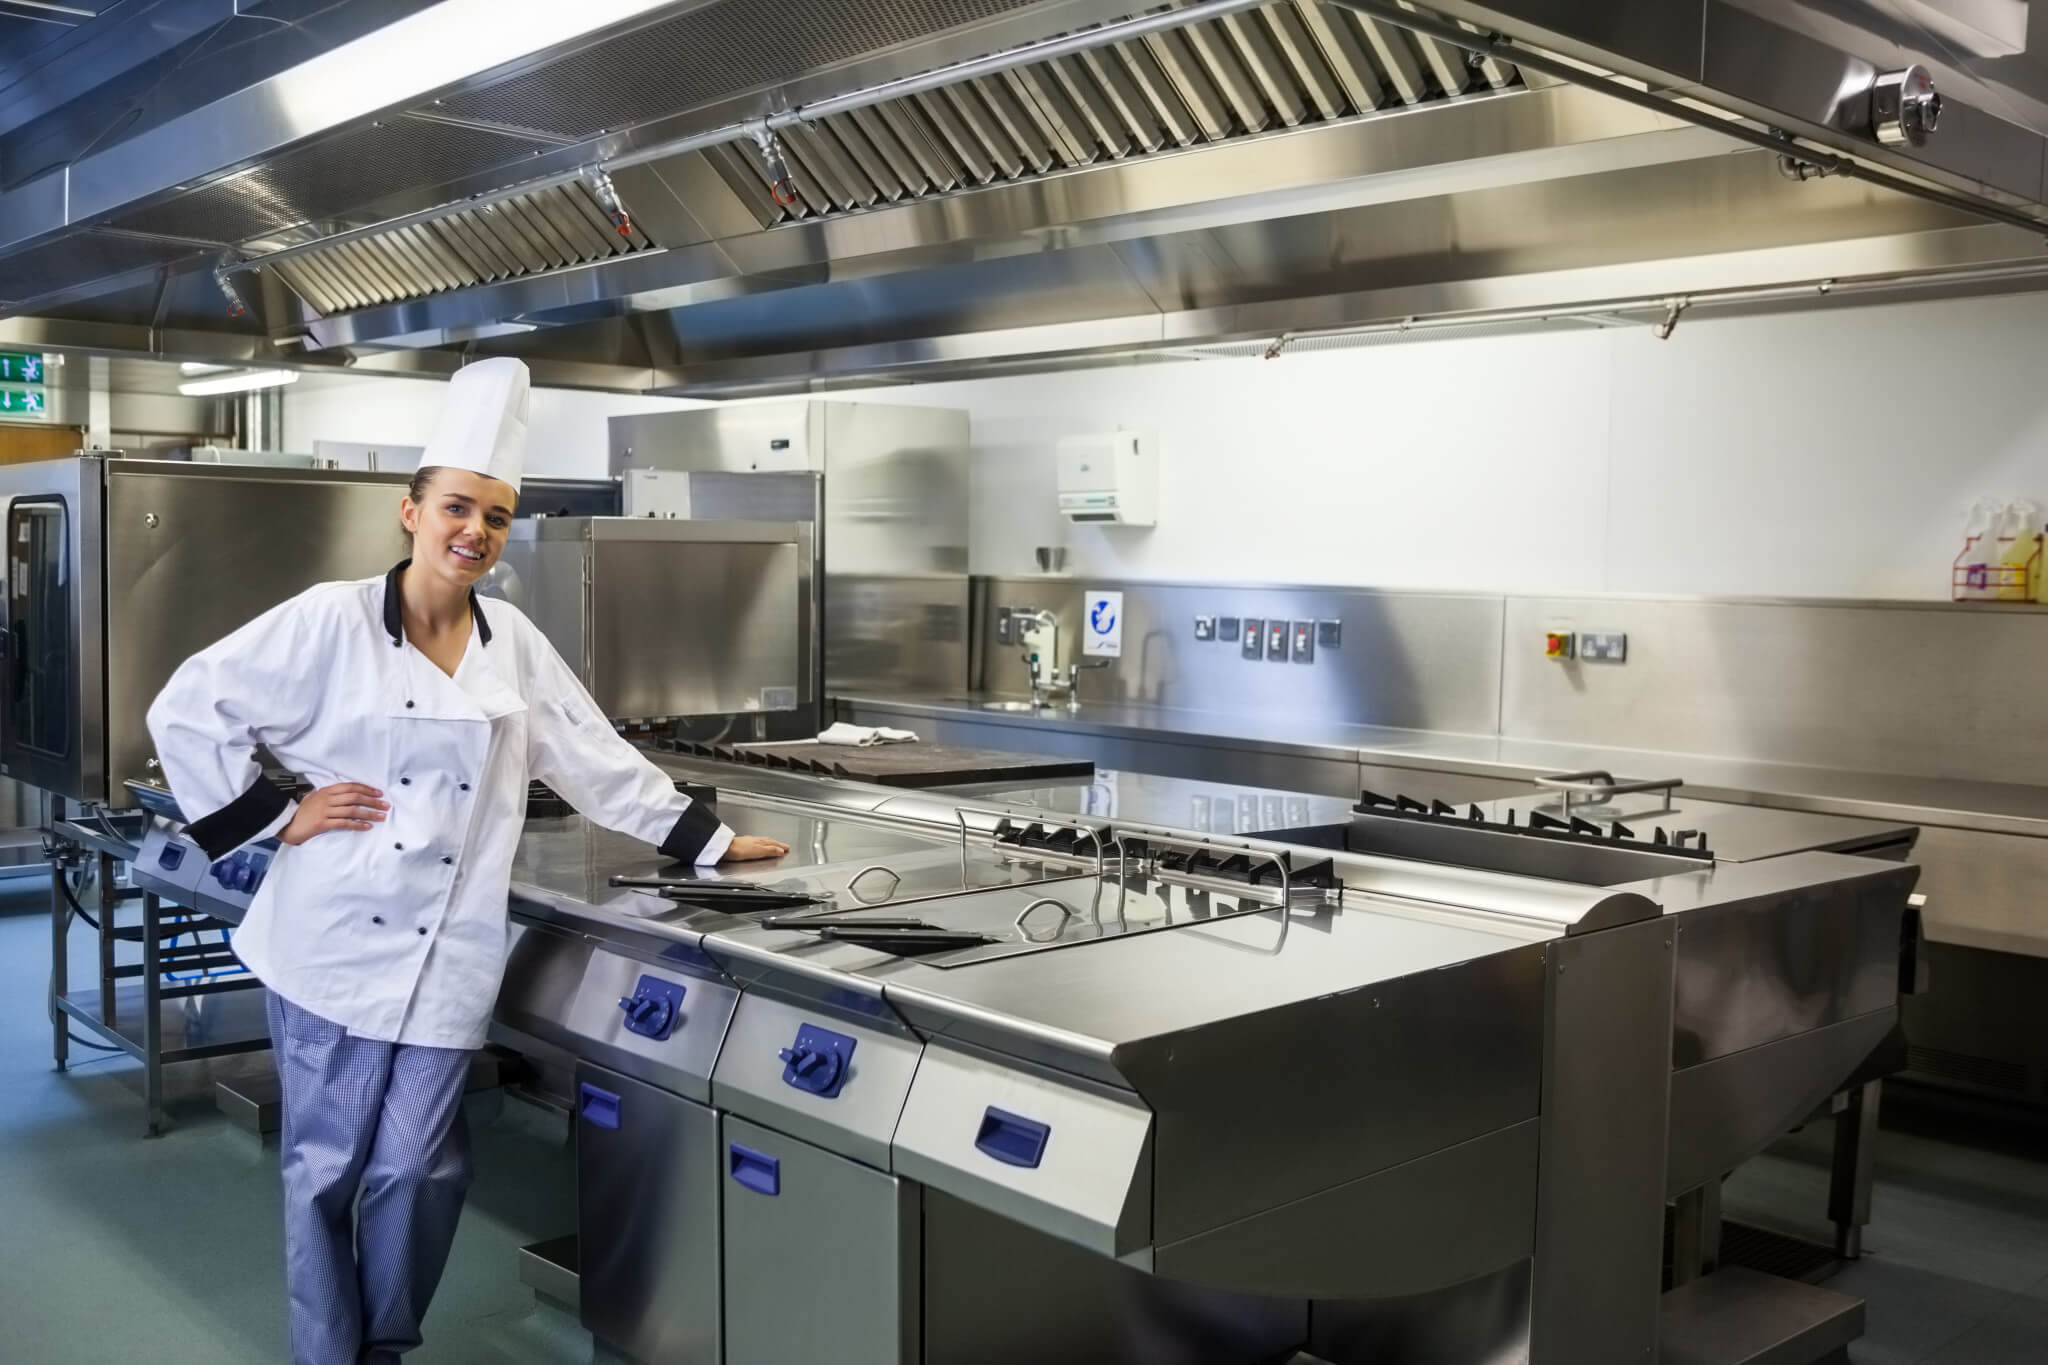 Master Your Melbourne Eatery with Top Commercial Kitchen Equipment